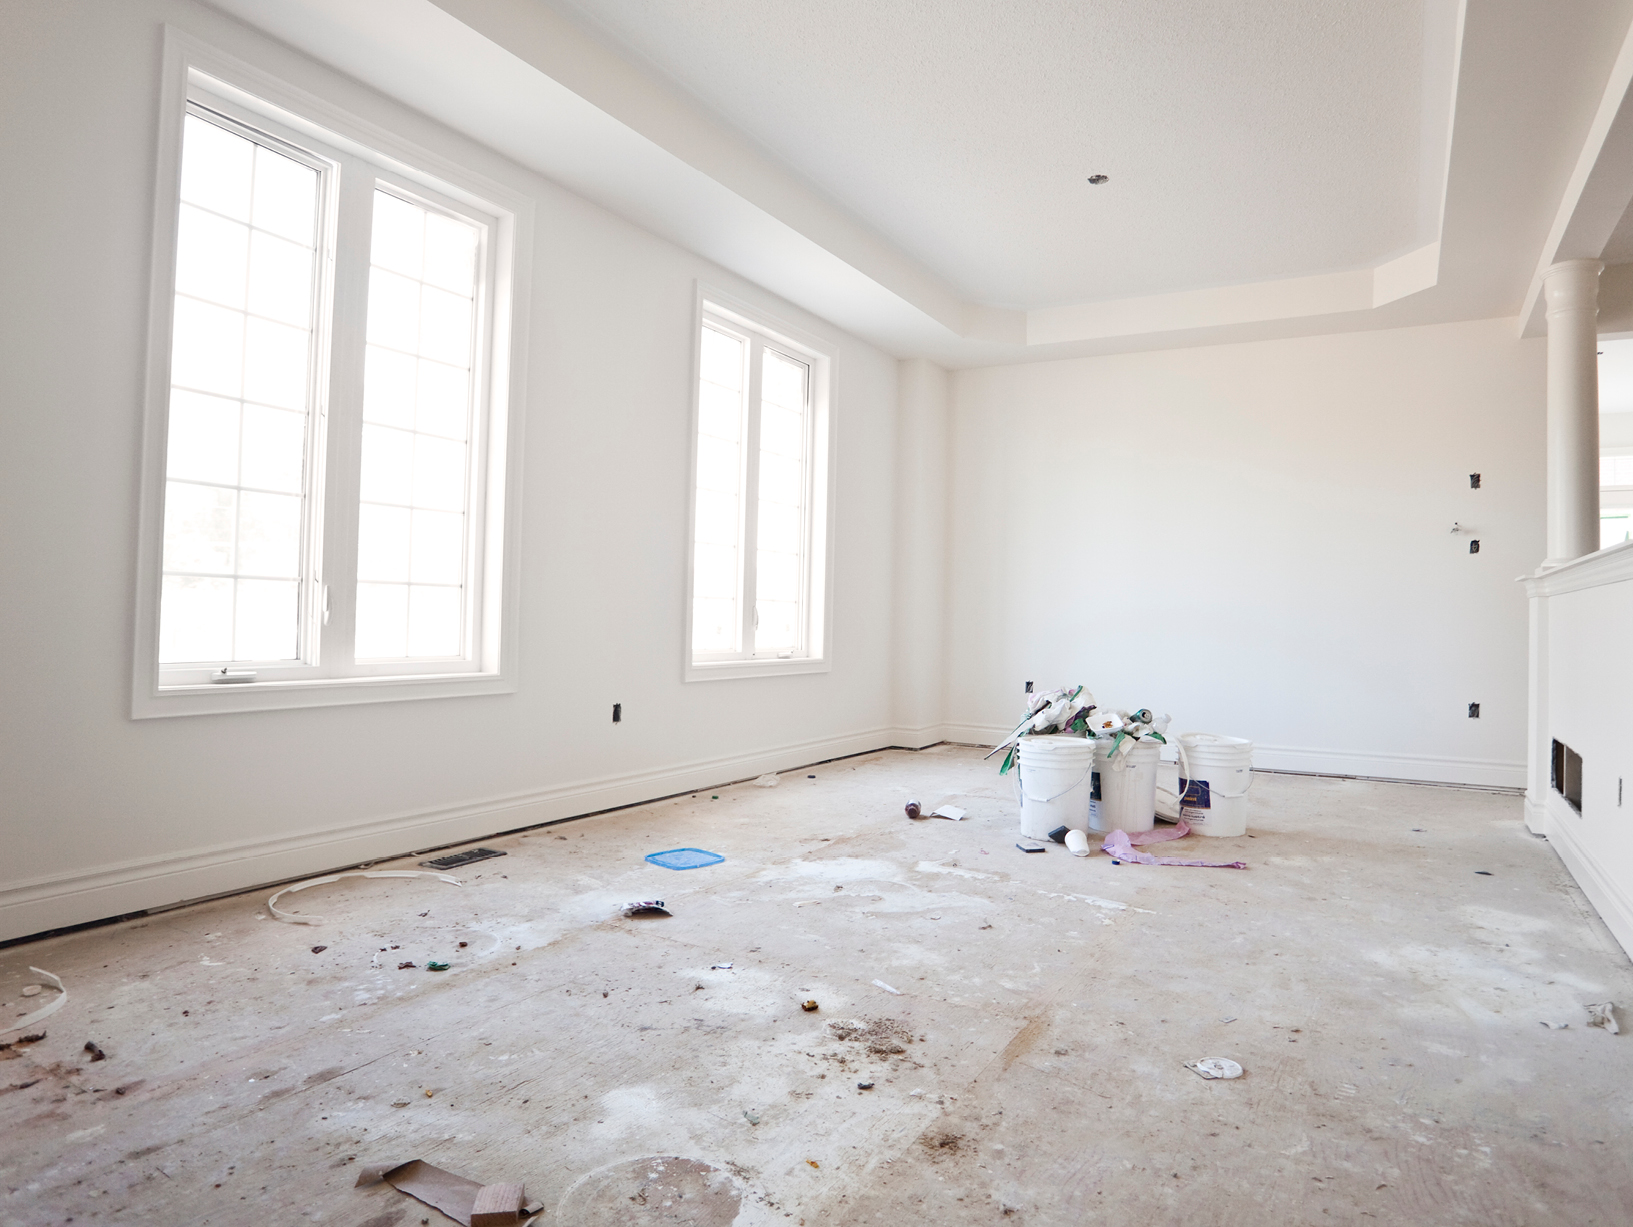 empty room under construction with white walls